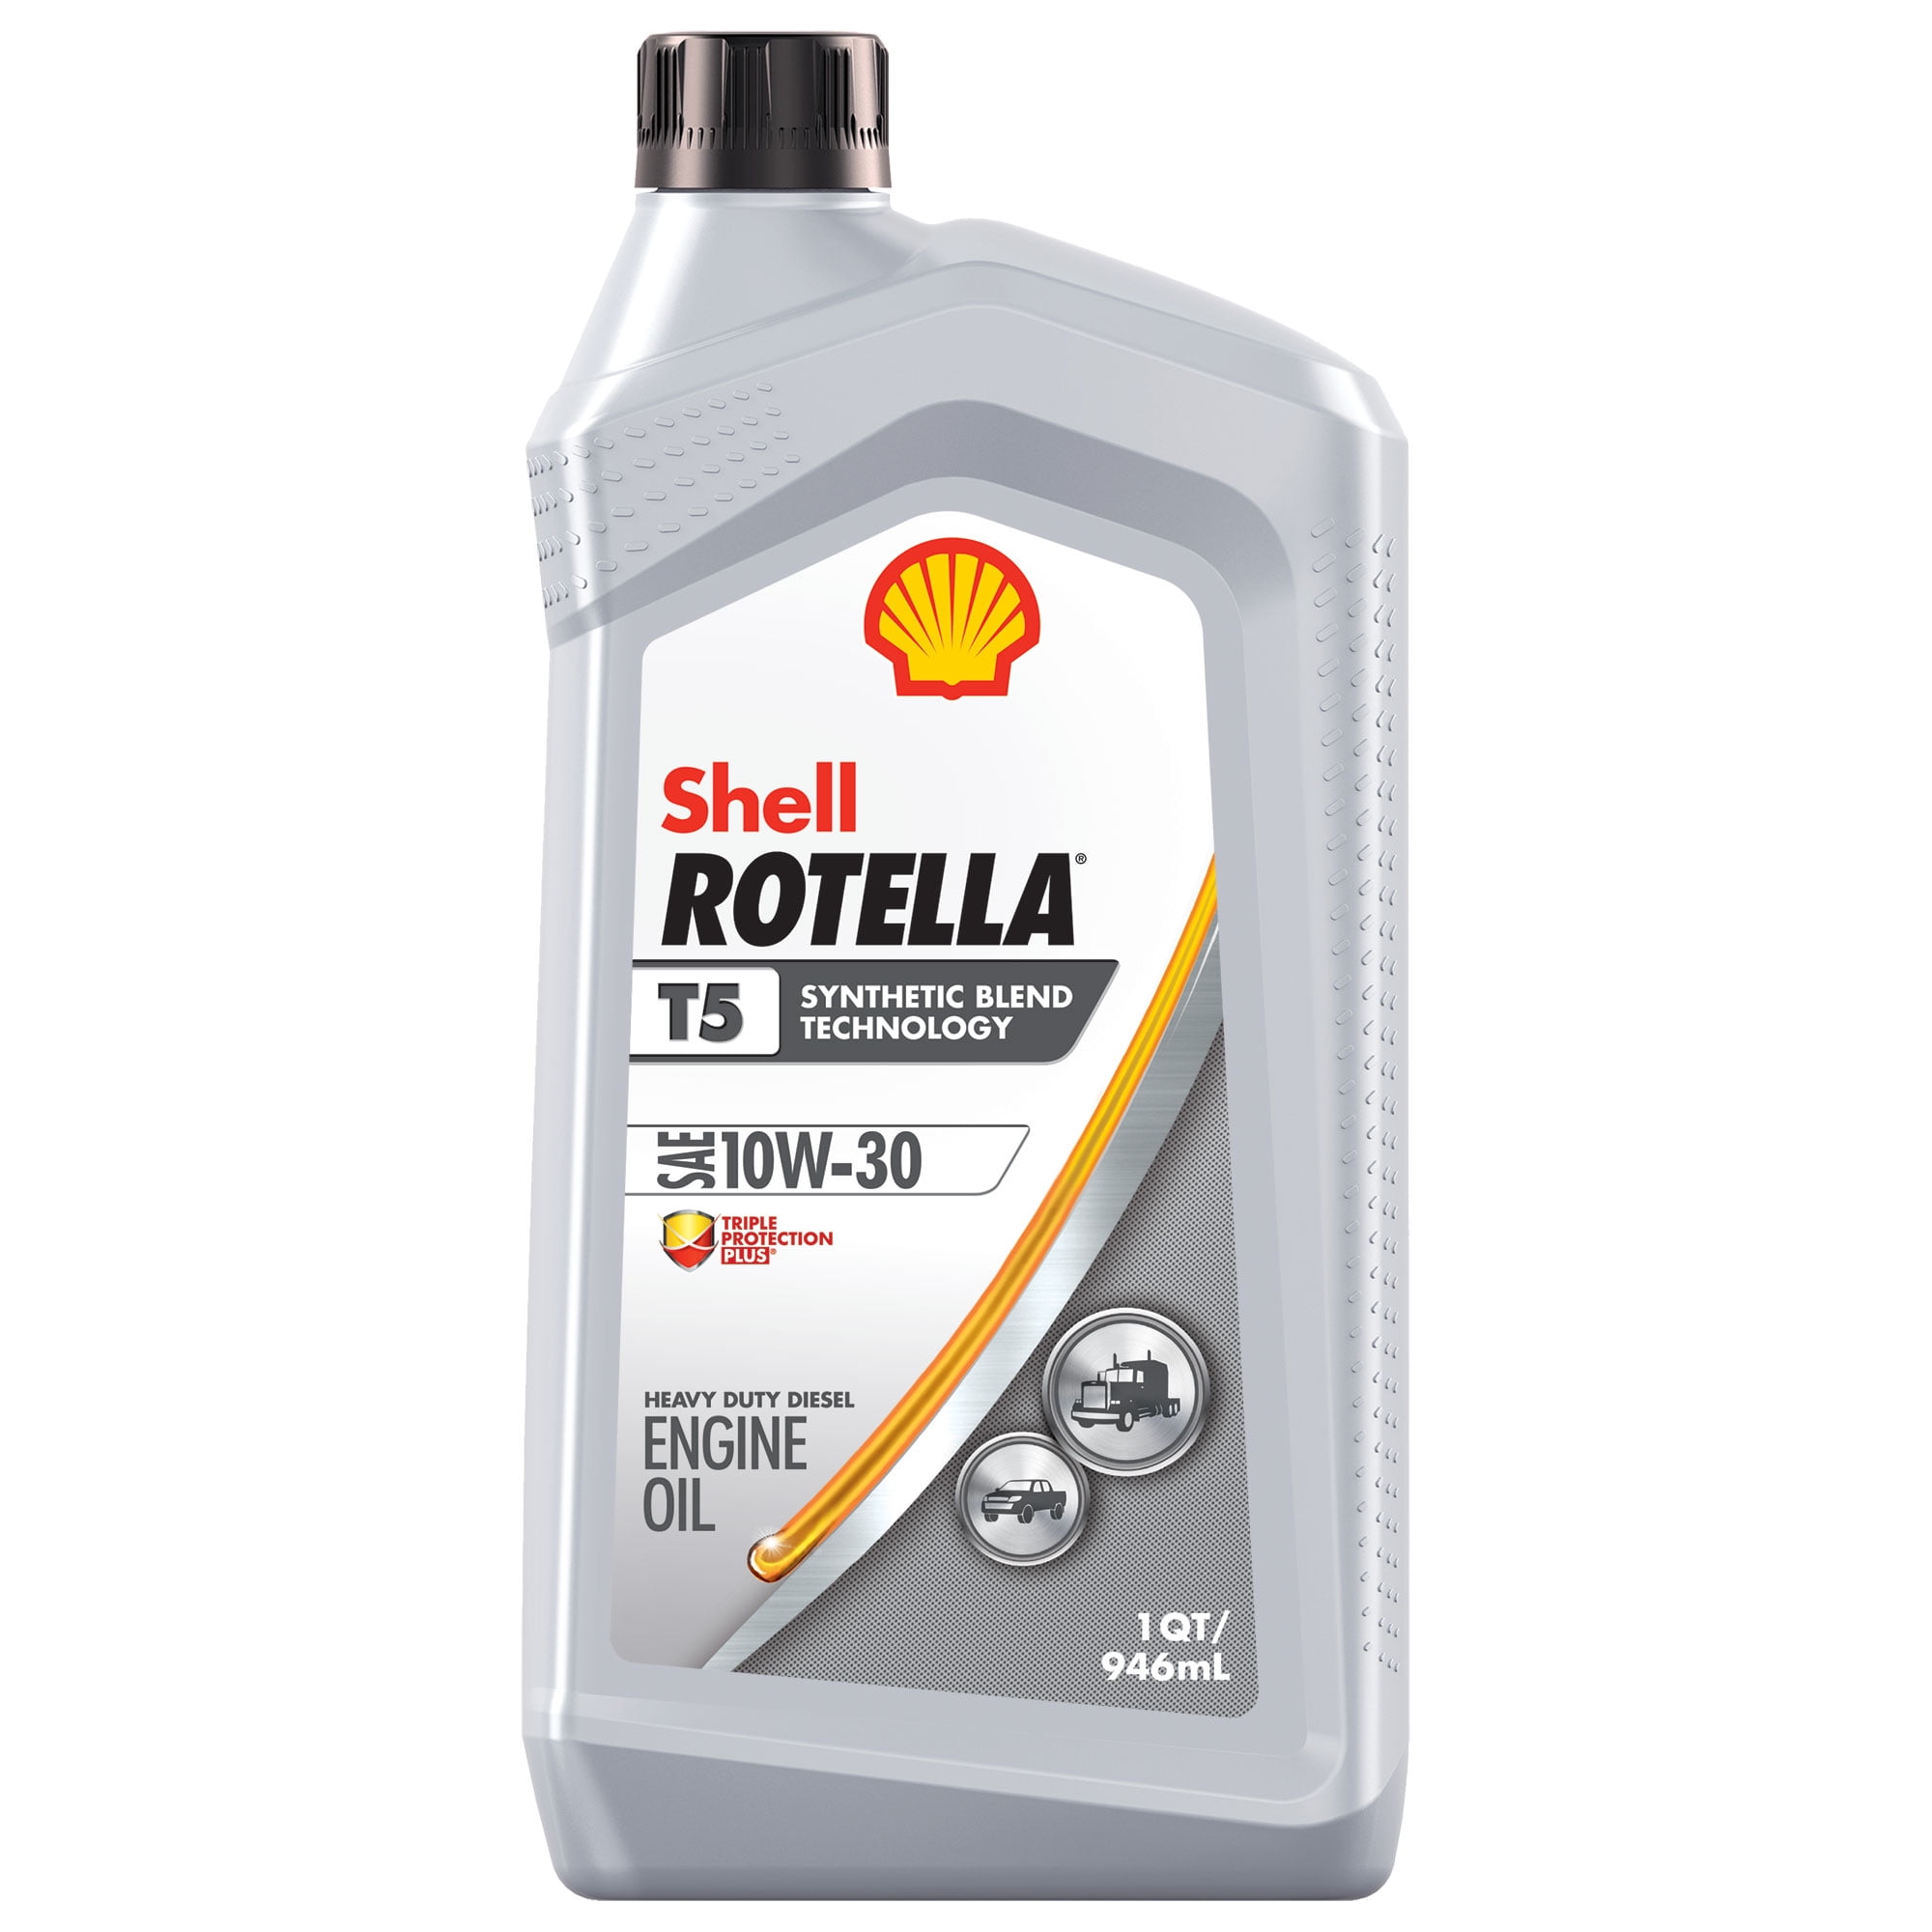 shell-rotella-t5-10w-30-synthetic-blend-diesel-engine-oil-1-qt